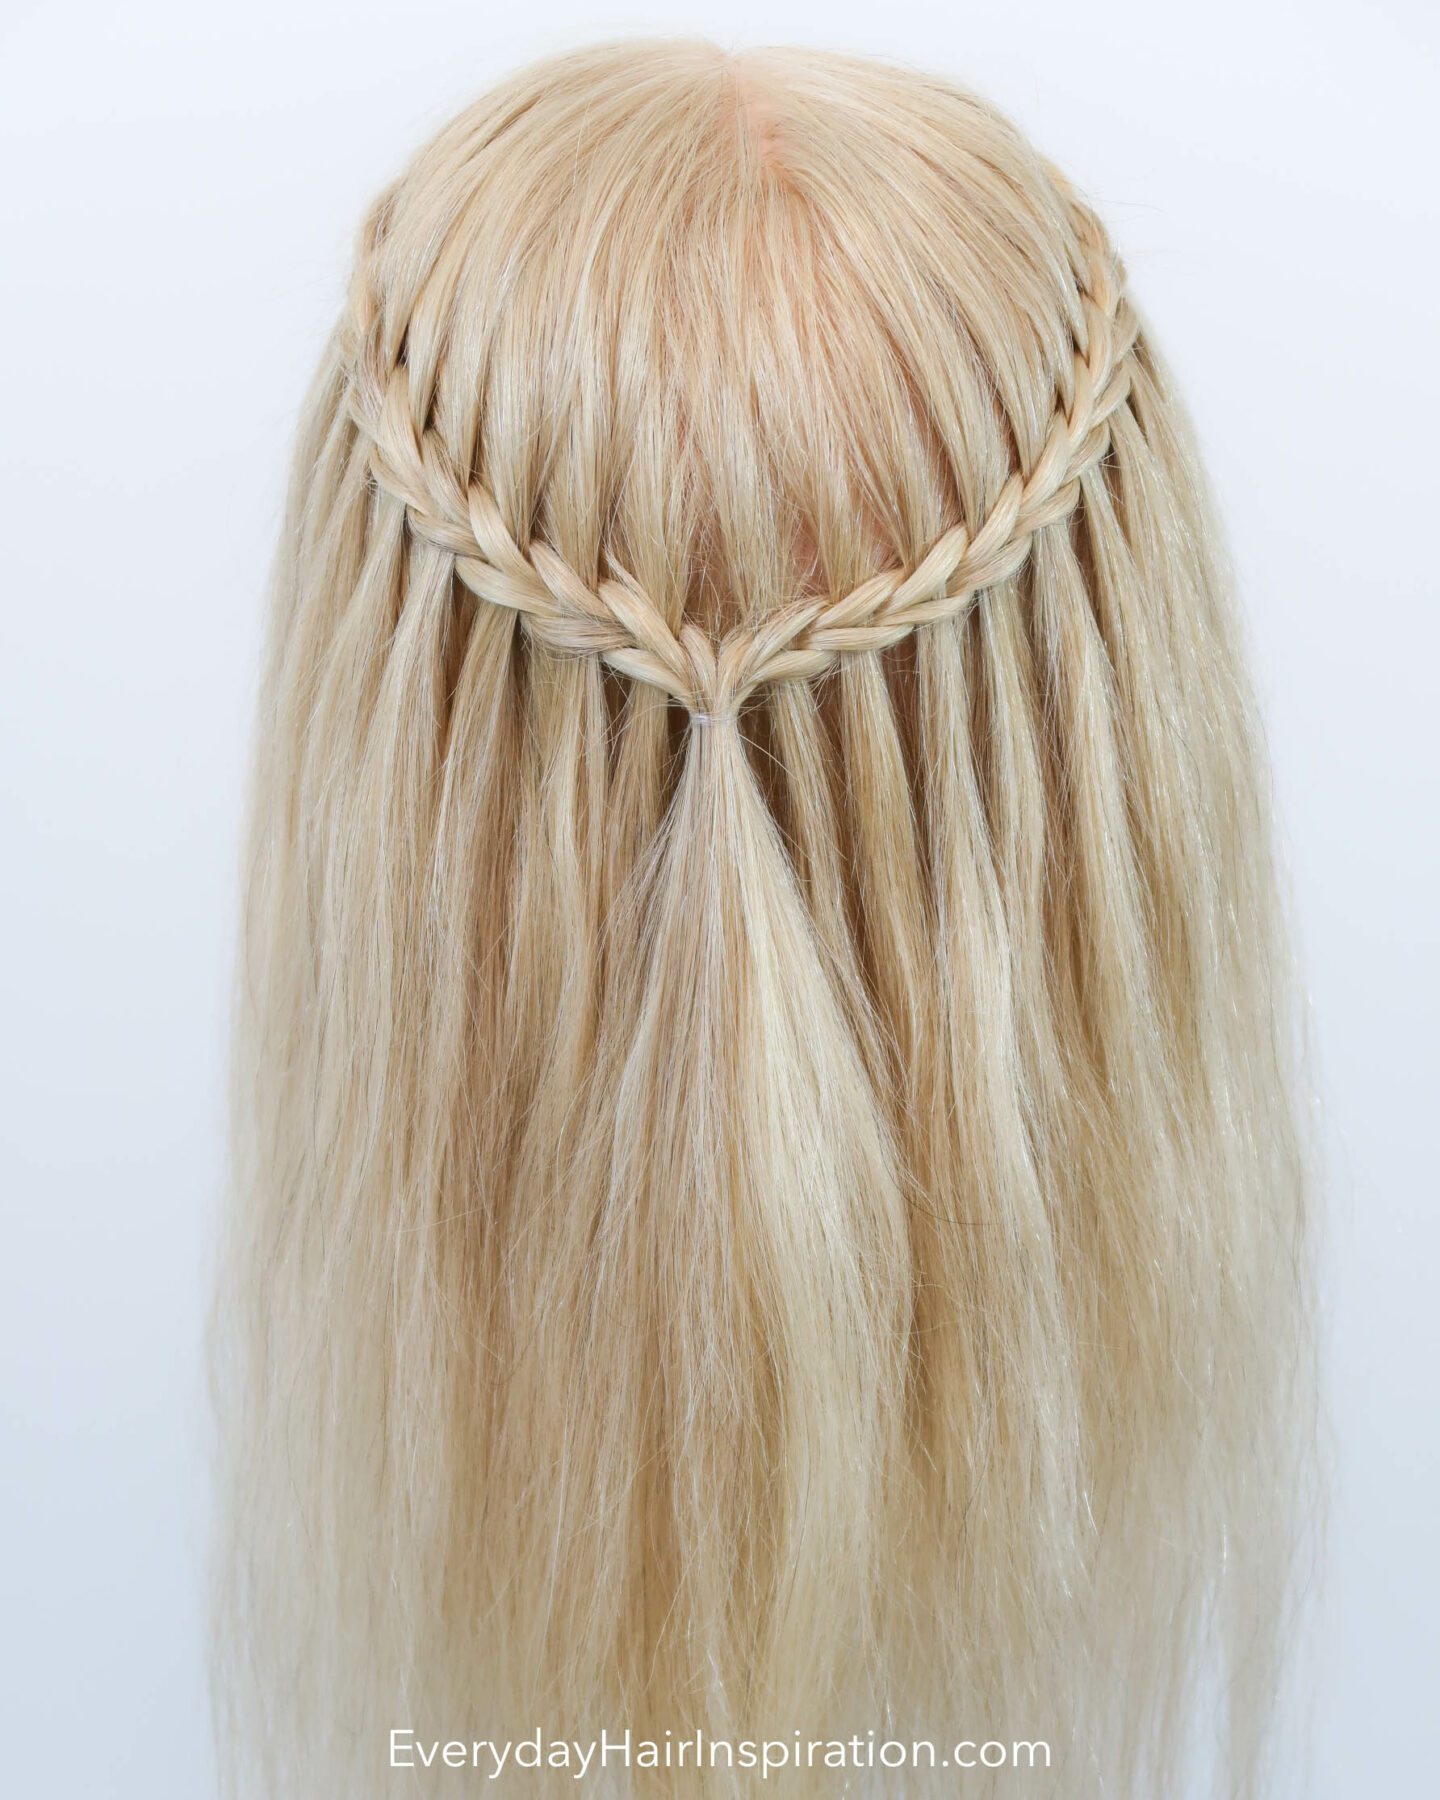 Blonde hairdresser head with a half up half down hair styles with a scissor waterfall braid, seen from the back. 